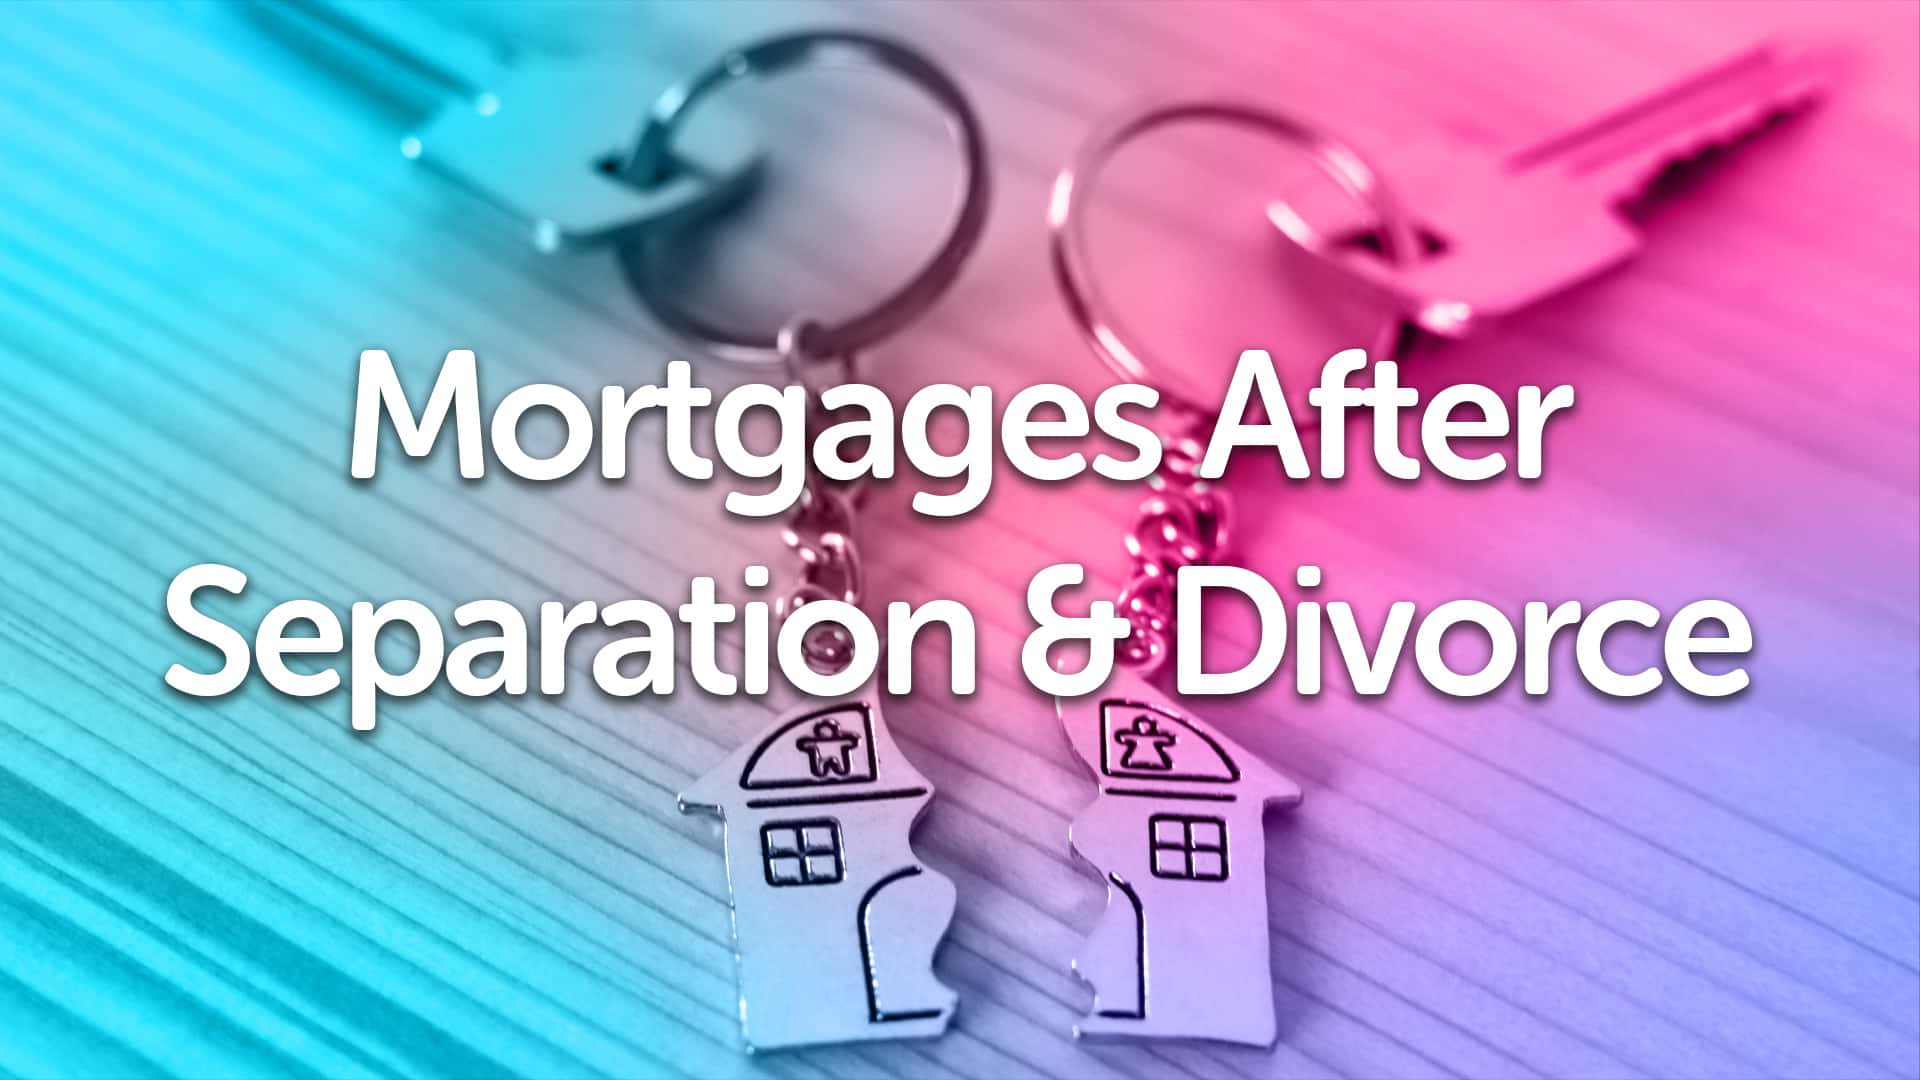 Divorce & Separation Mortgage Advice in Grimsby